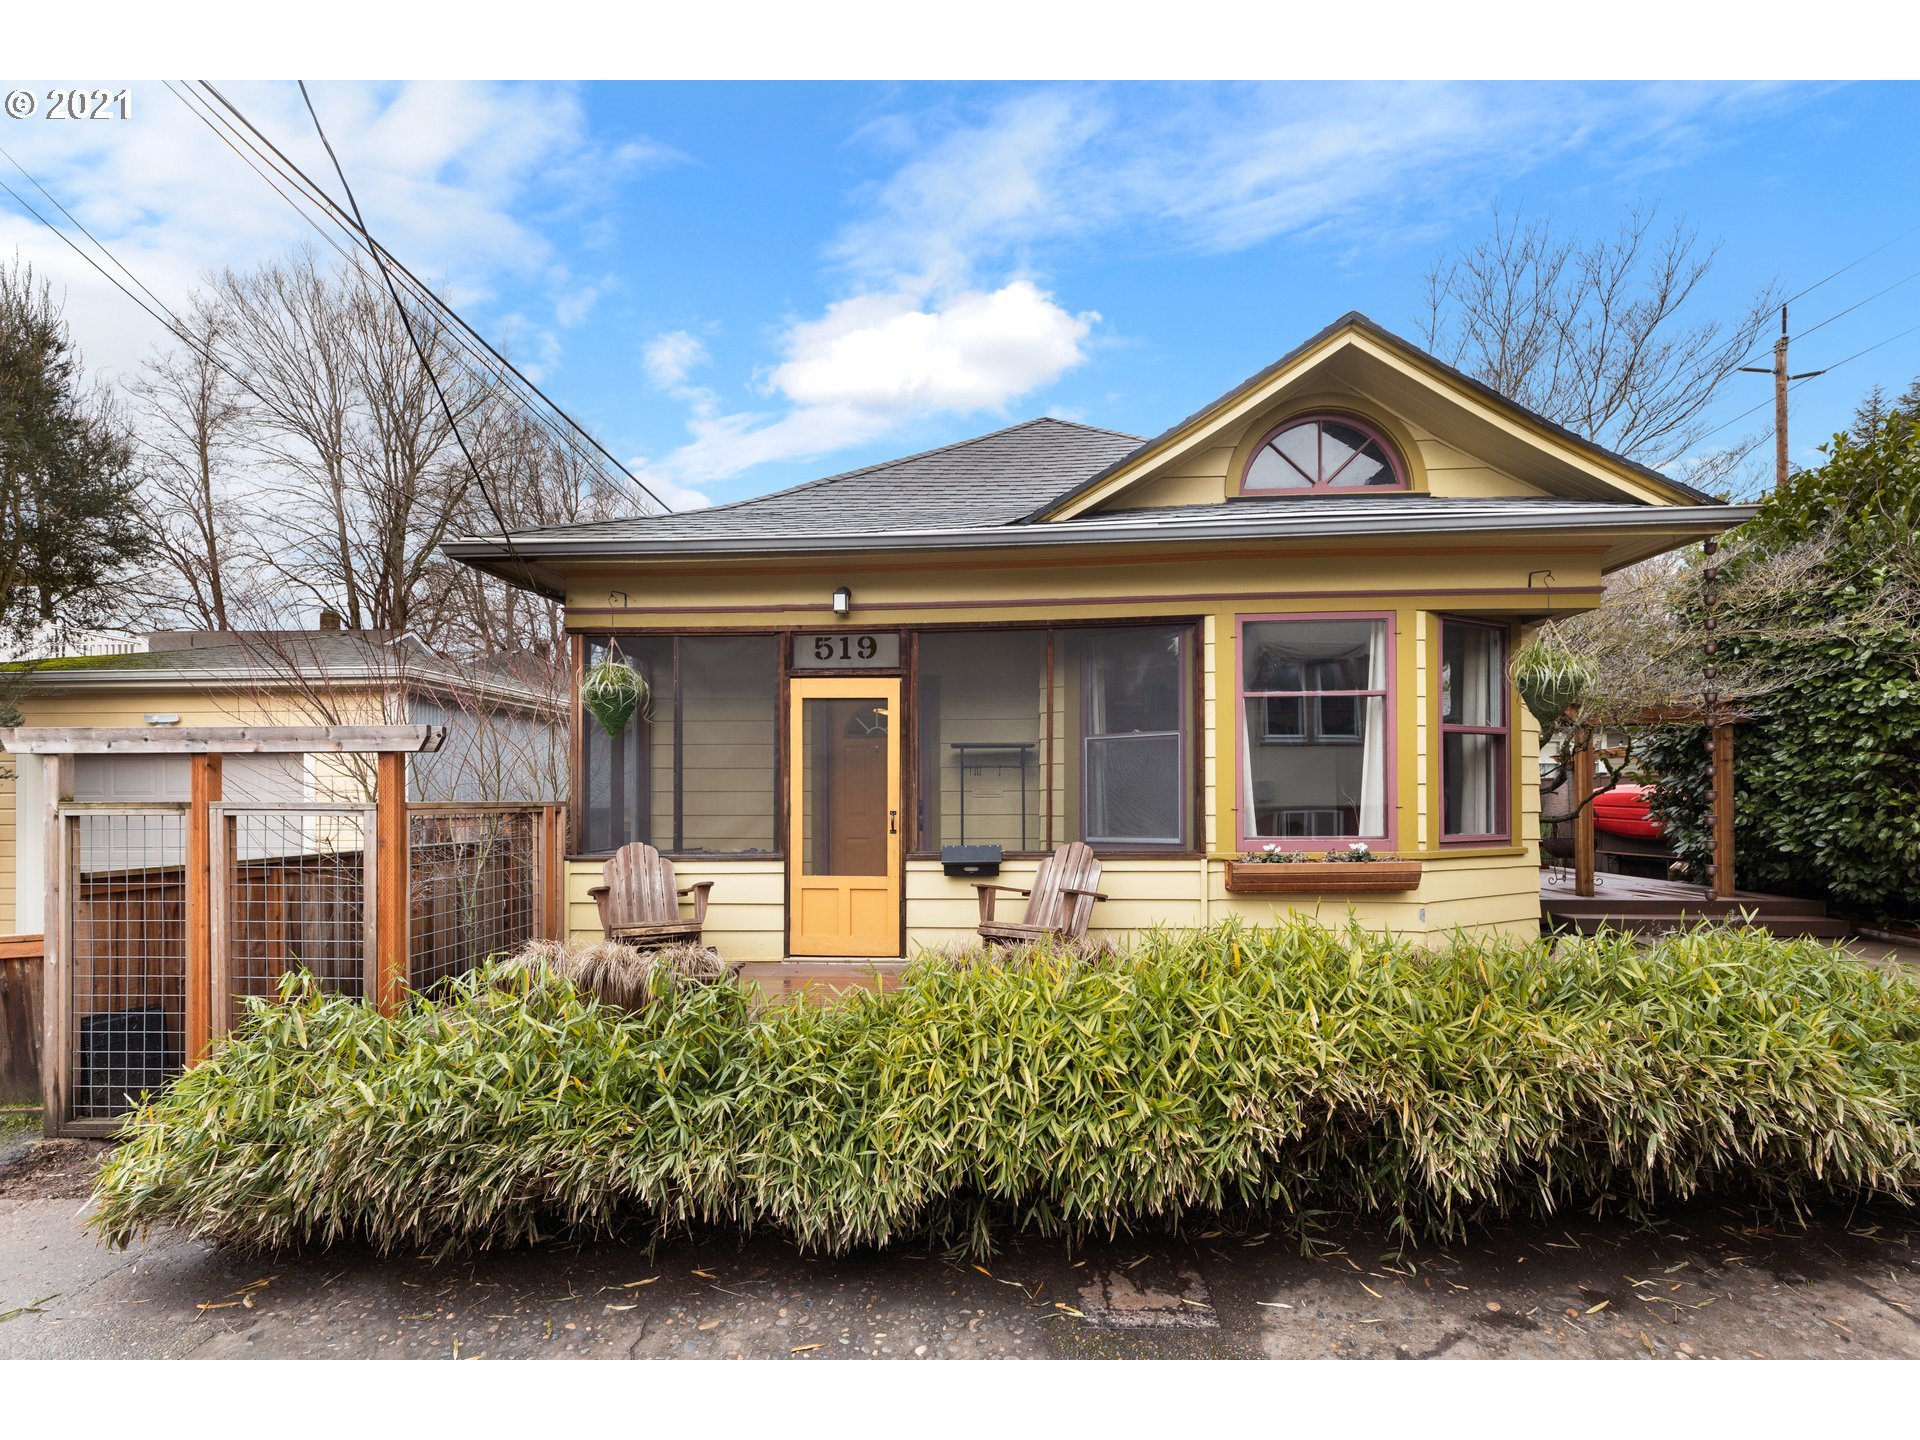 519 SE 36TH AVE (1 of 28)